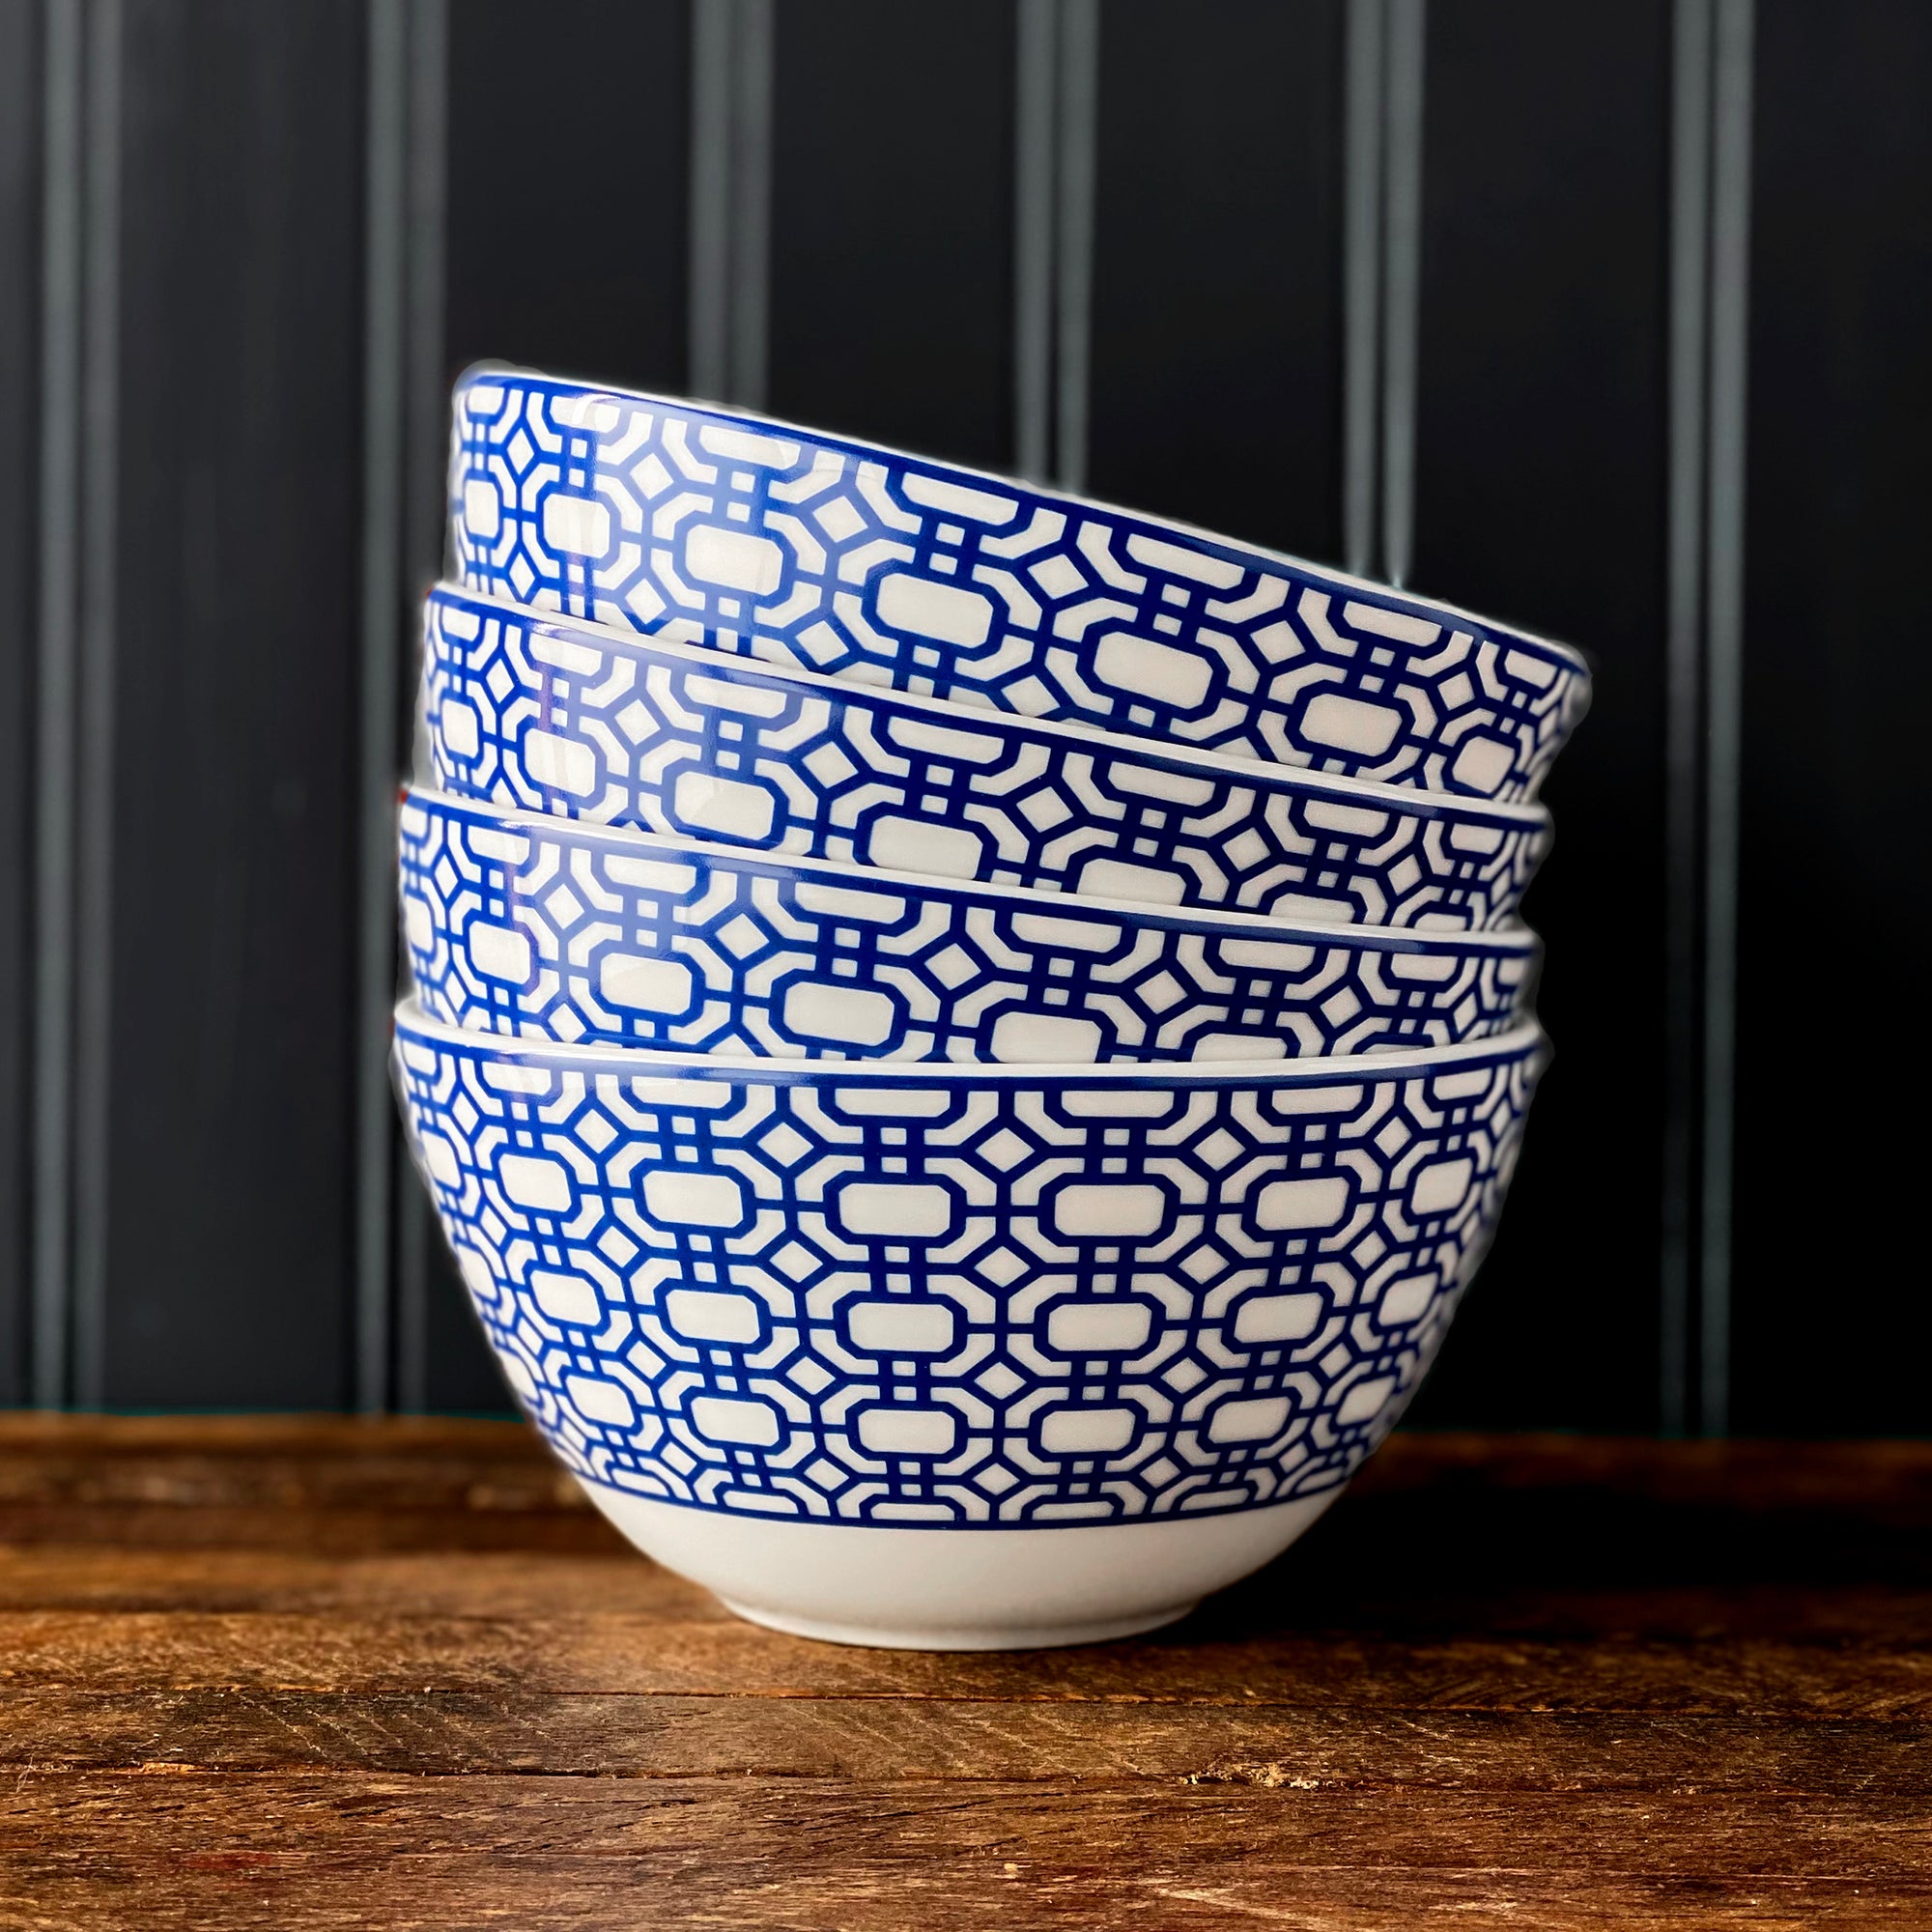 A premium porcelain Newport Cereal Bowl from Caskata Artisanal Home with a white base and a blue geometric pattern reminiscent of the Newport Garden Gate around its exterior.